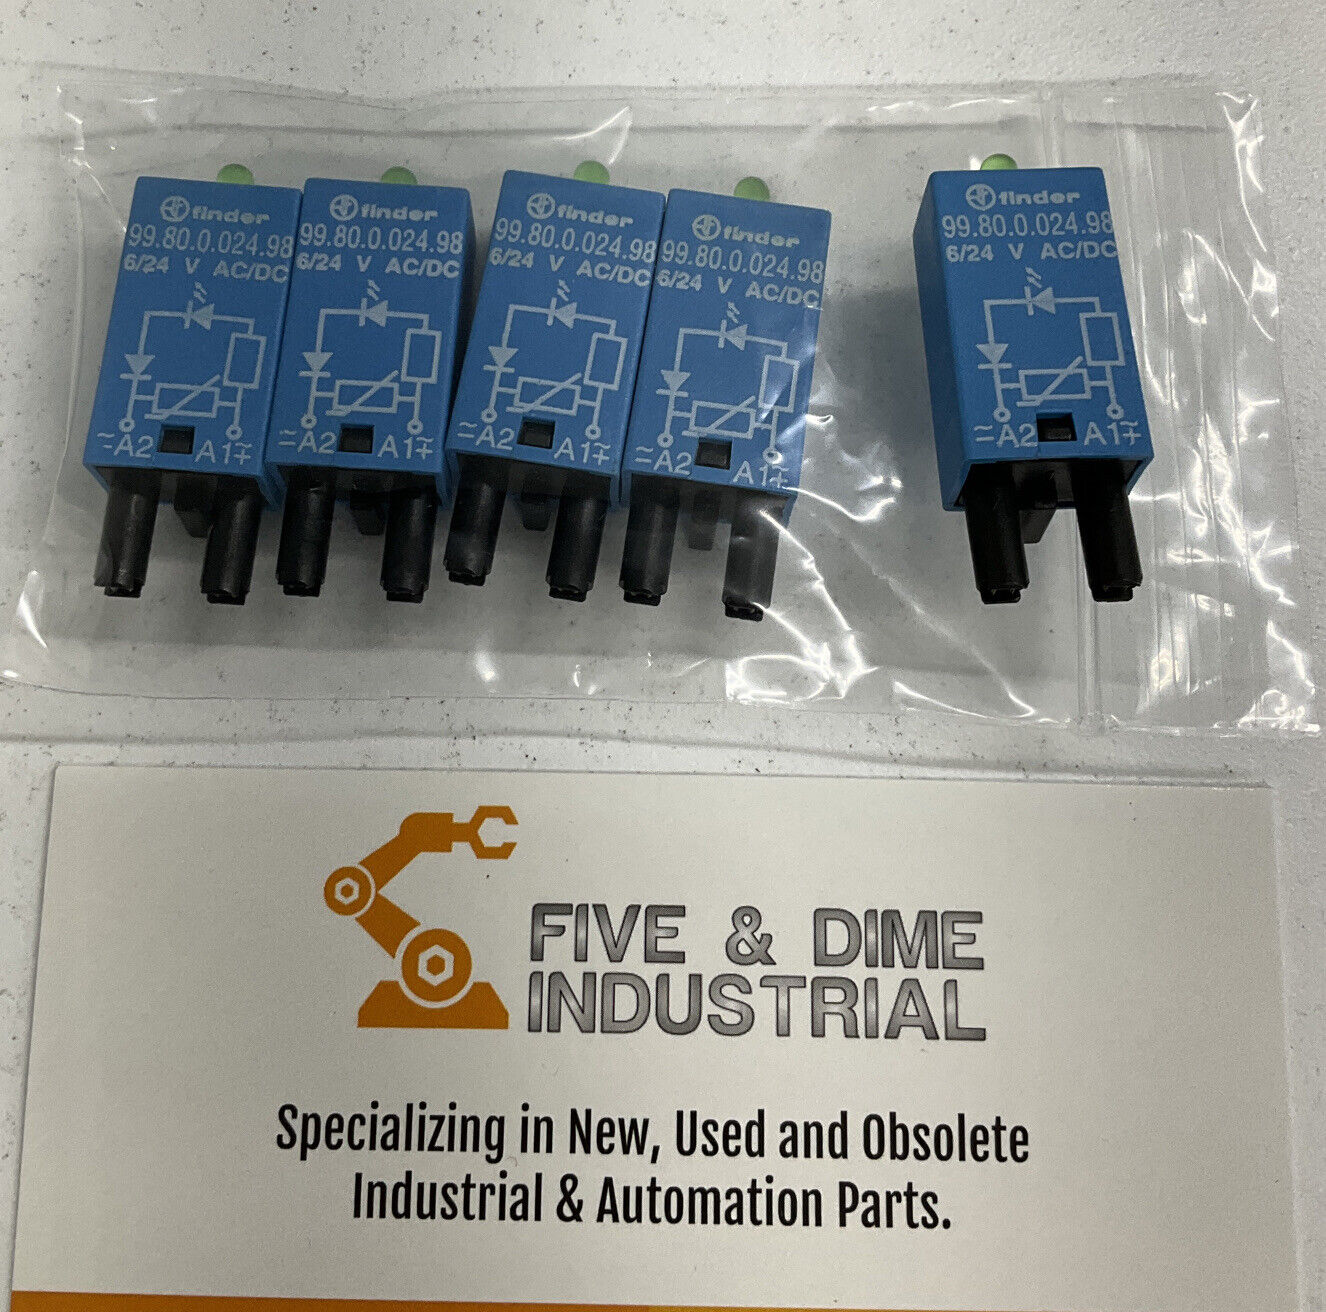 Finder 99.80.0.024.98   Diode  Relay  6/24 Volts AC/DC  Lot of 5 (YE161)